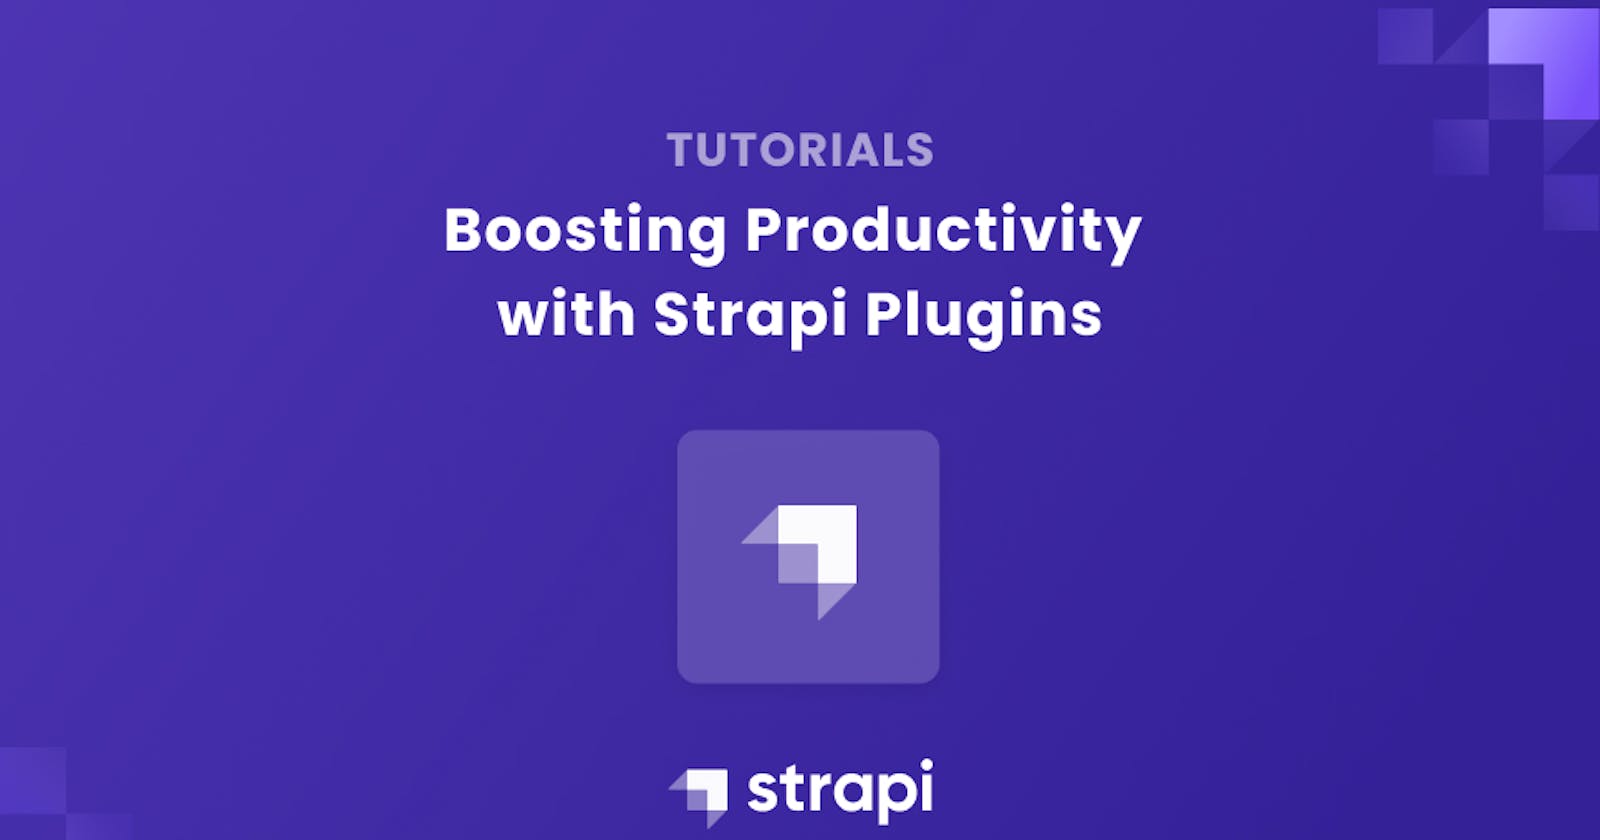 Boosting Productivity with Strapi Plugins